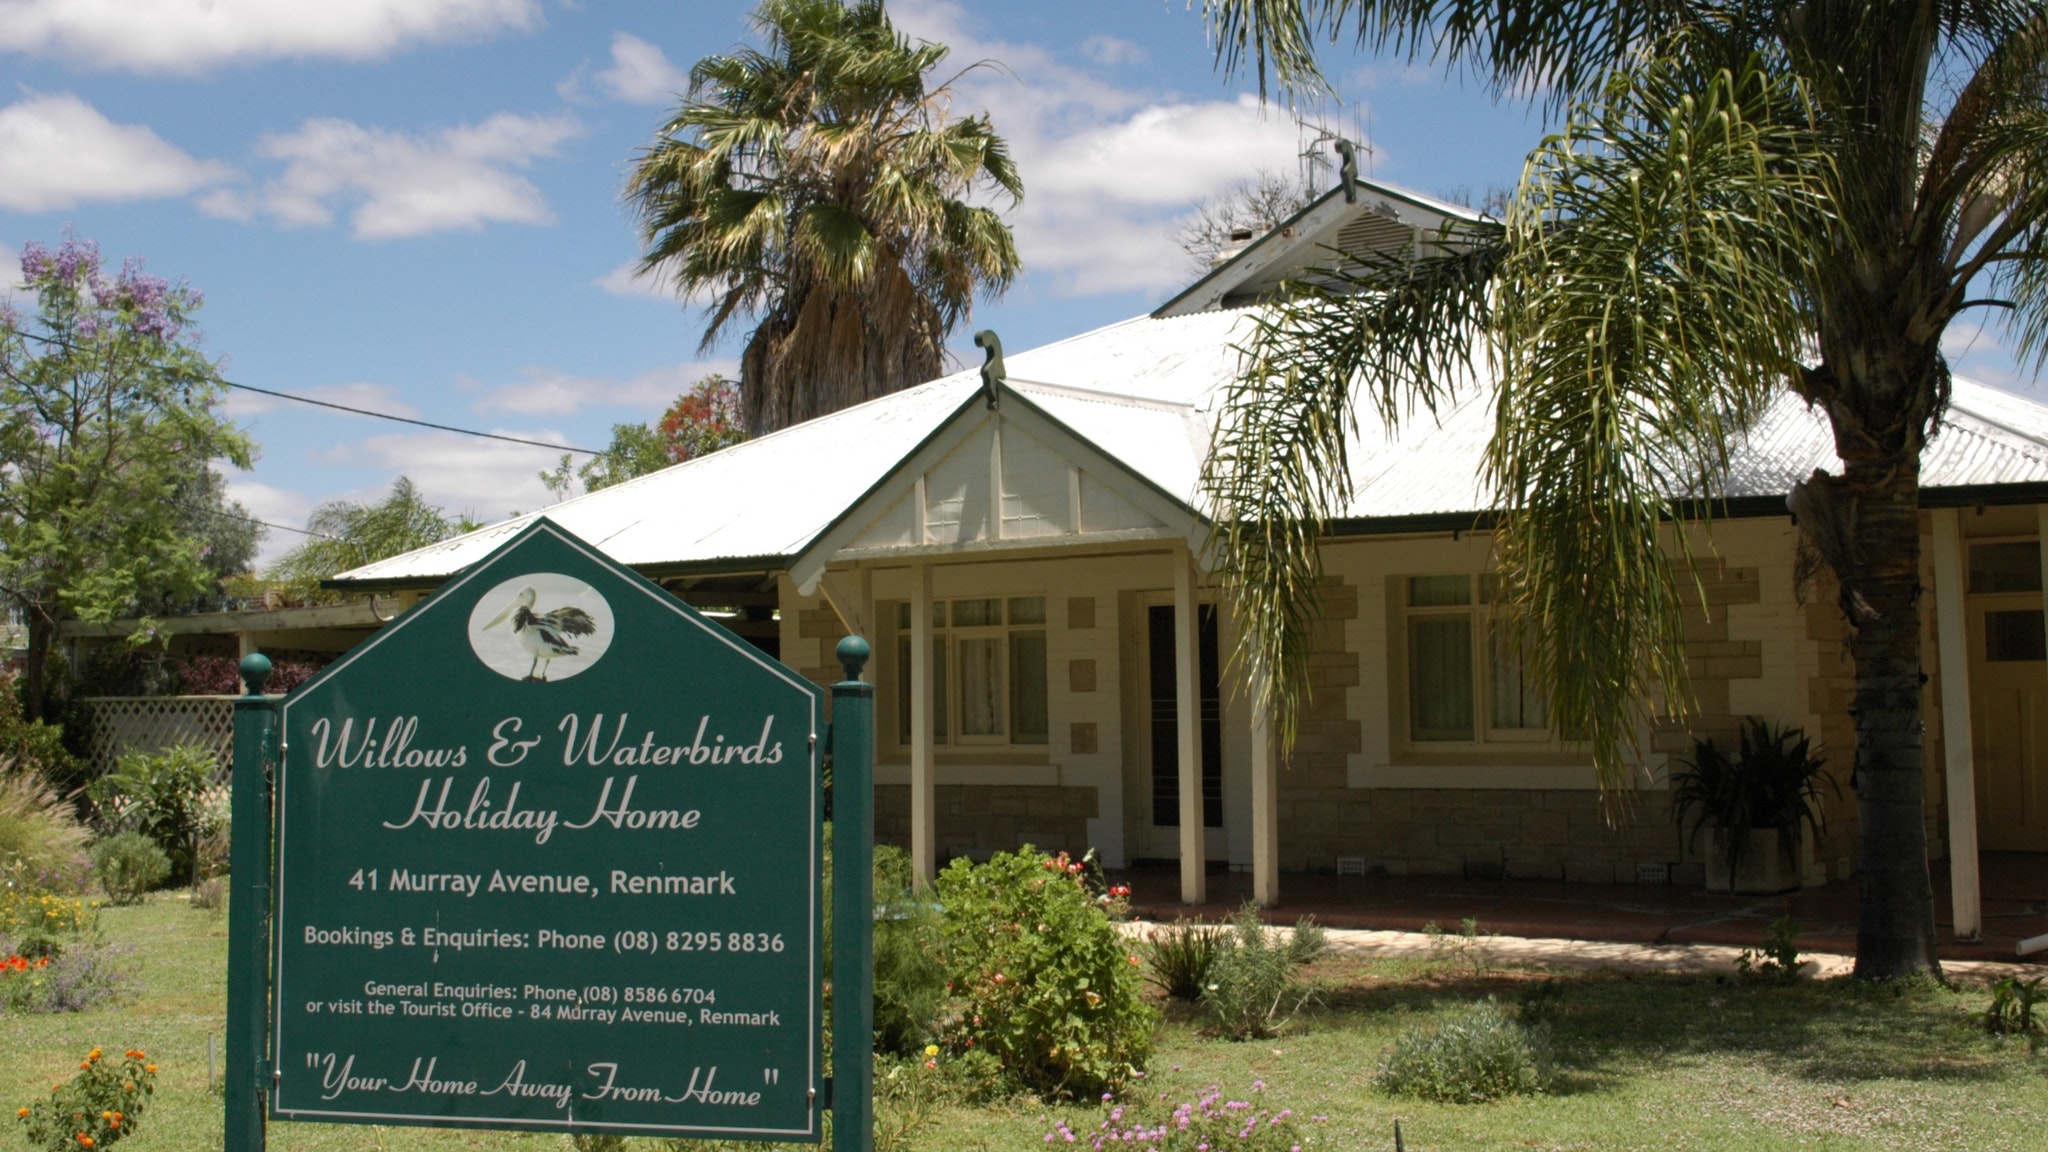 Renmark Holiday Home Willows  Waterbirds - VIC Tourism